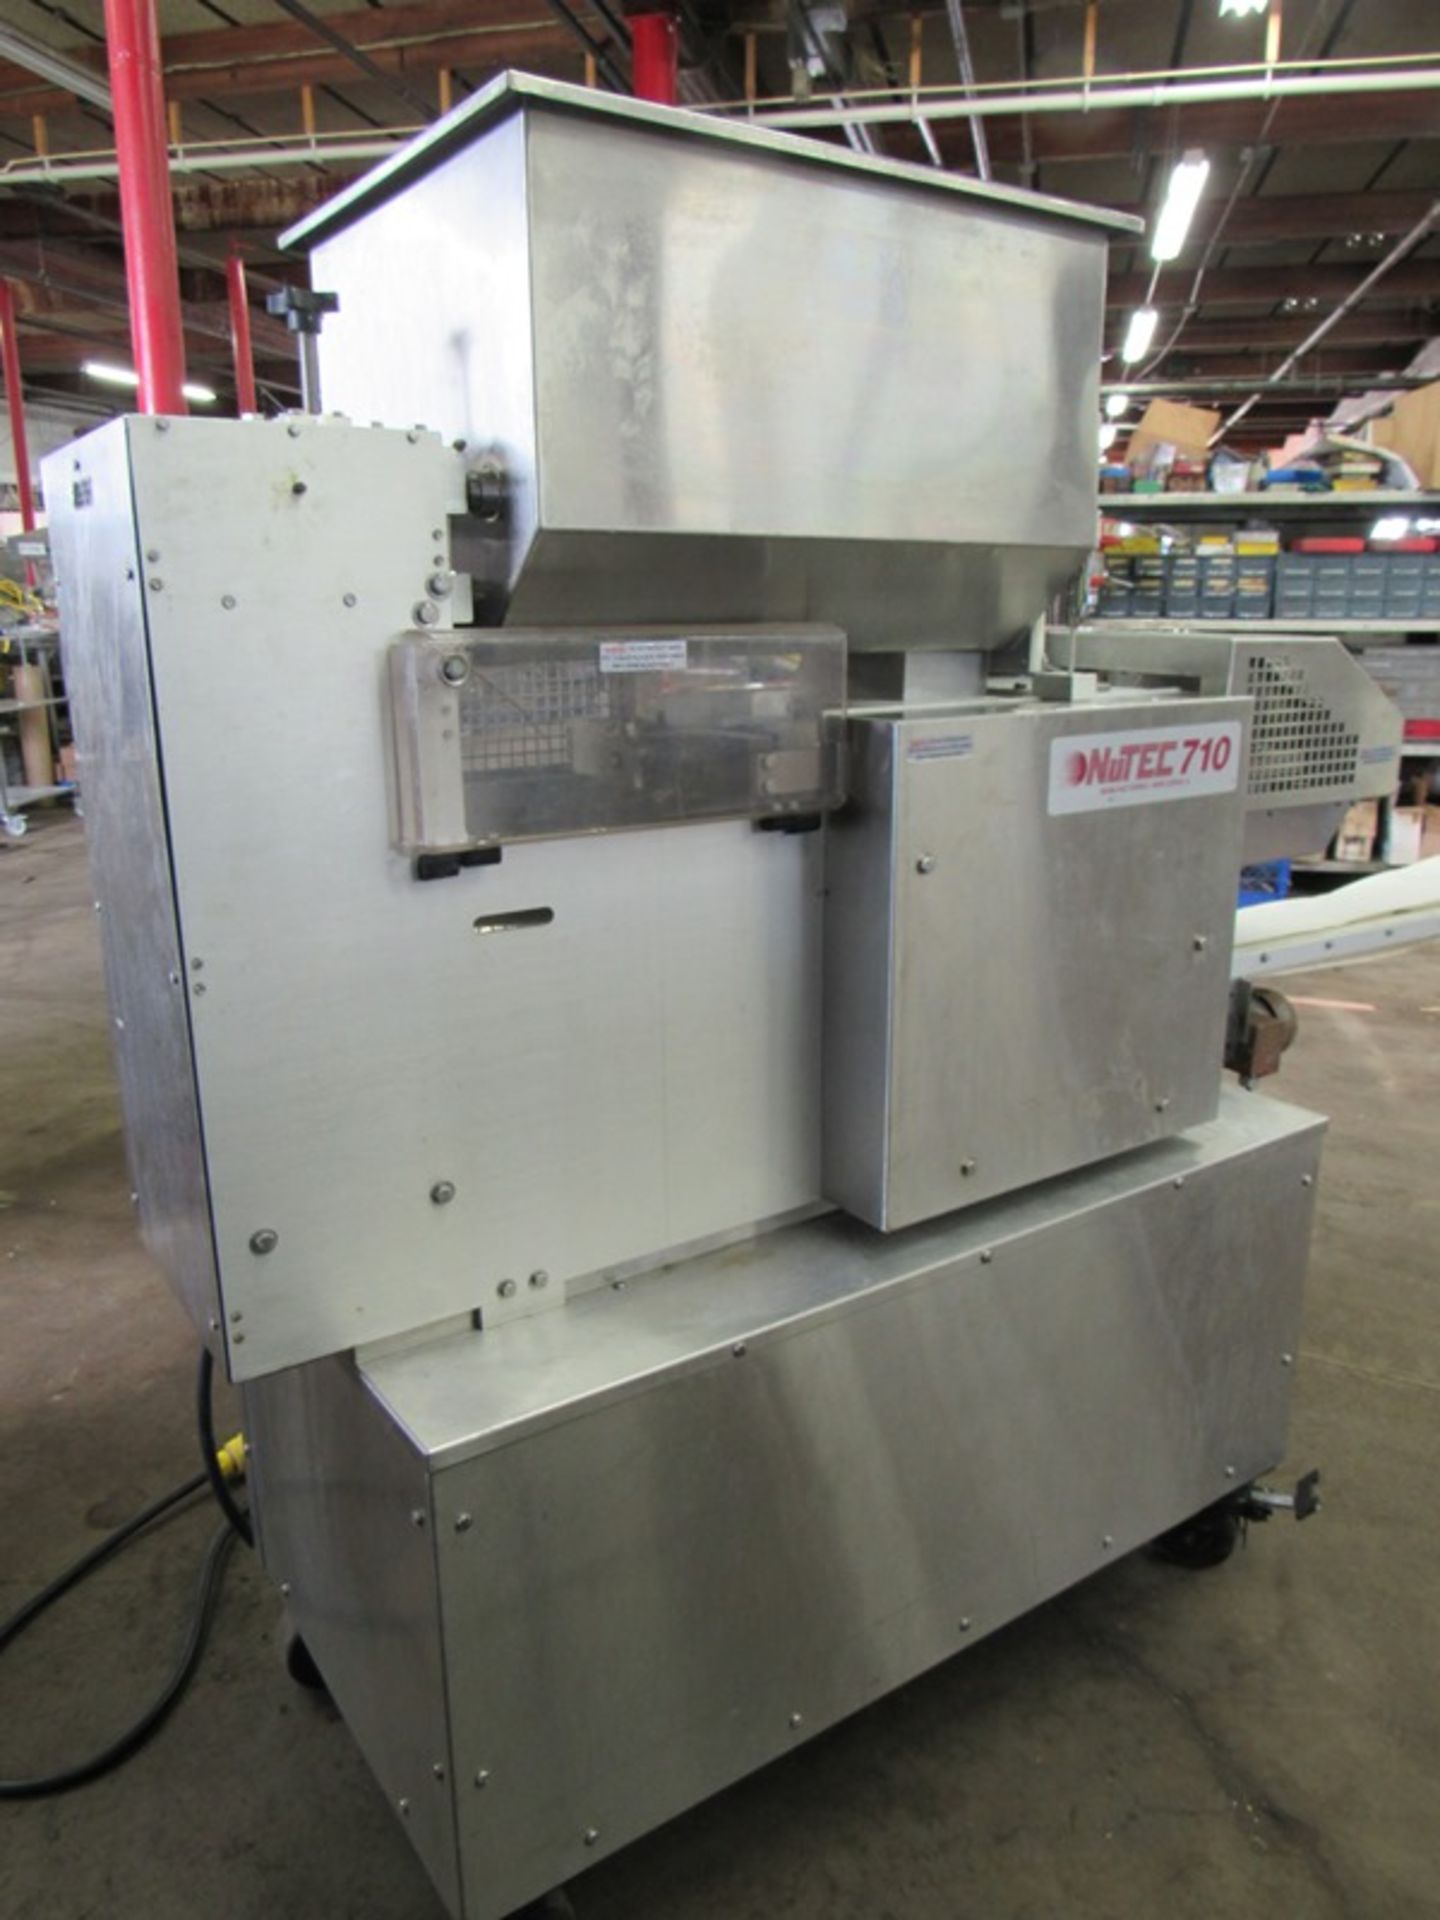 Nutec Mdl. 710 Portable Patty Forming Machine with paper feed setup with 4 1/2" diameter X 3/8" - Image 3 of 10